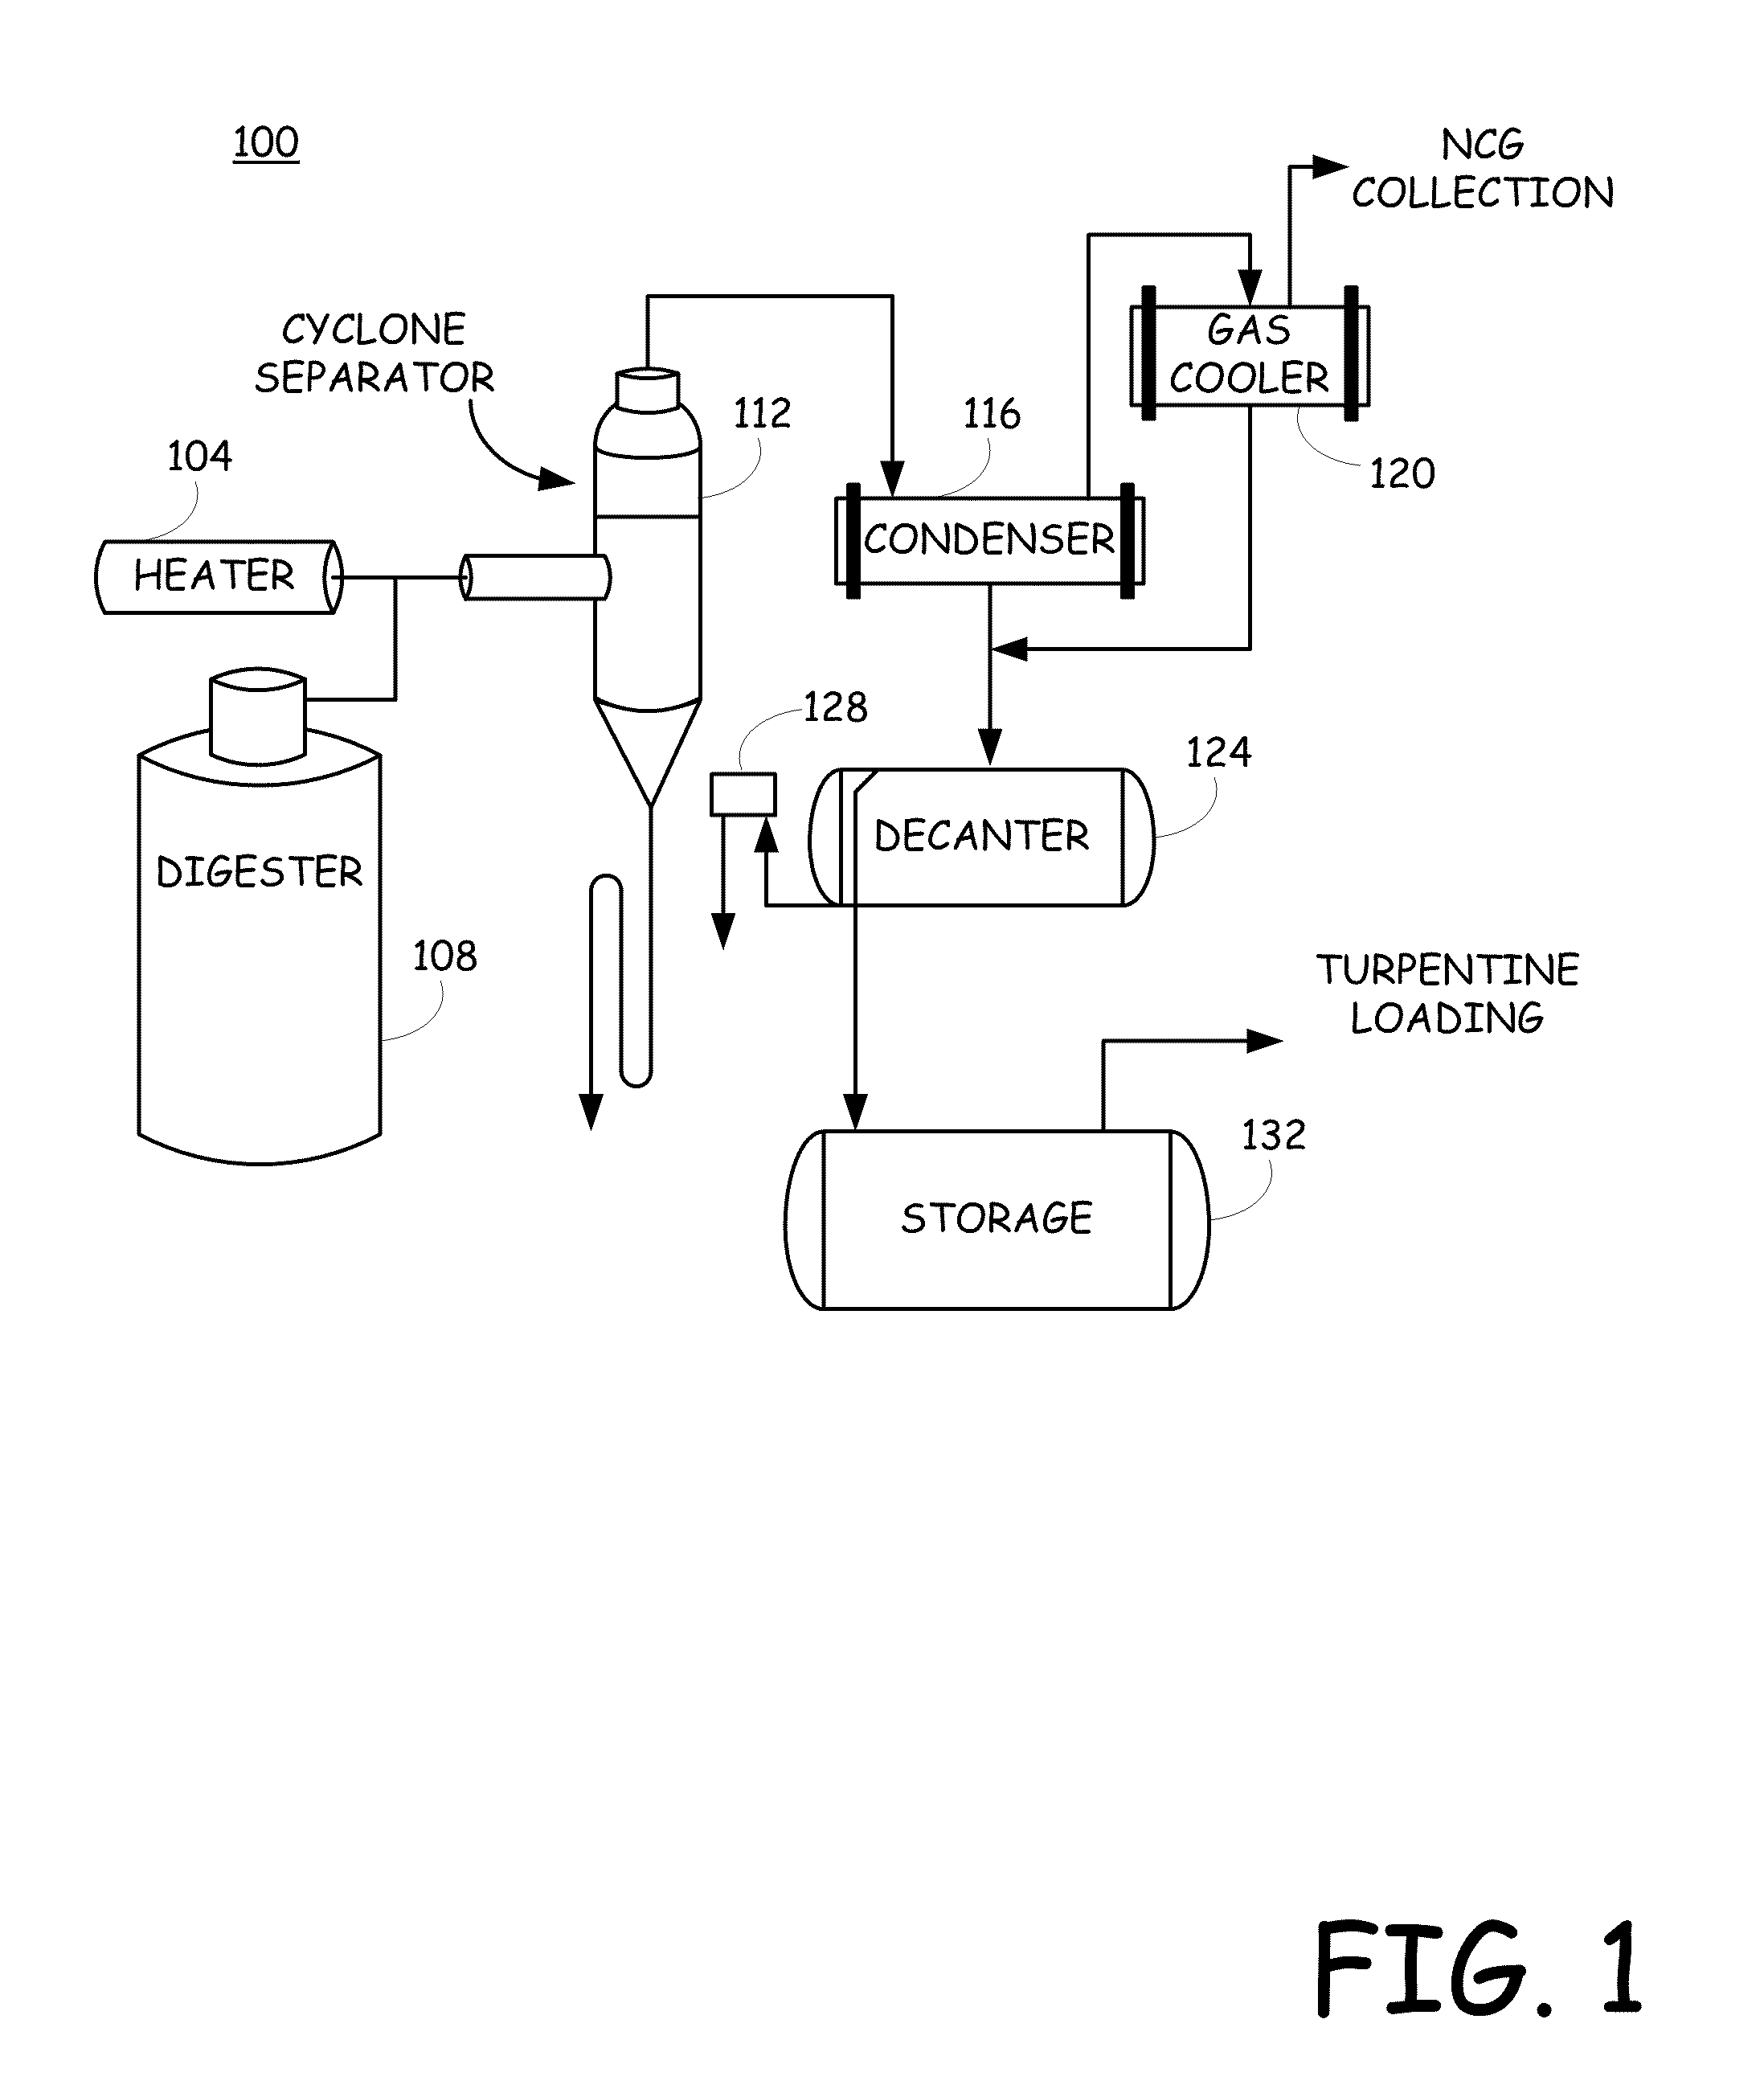 System and method for recovering turpentine during wood material processing